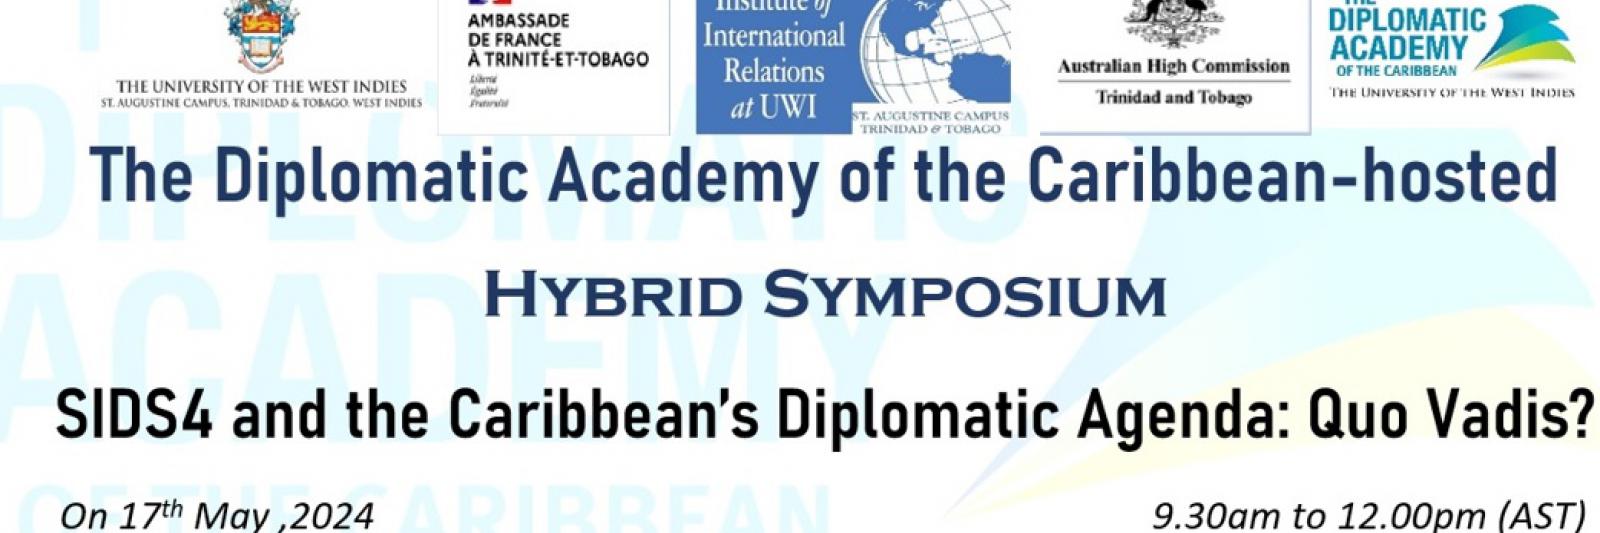 The Diplomatic Academy of the Caribbean-hosted Hybrid Symposium